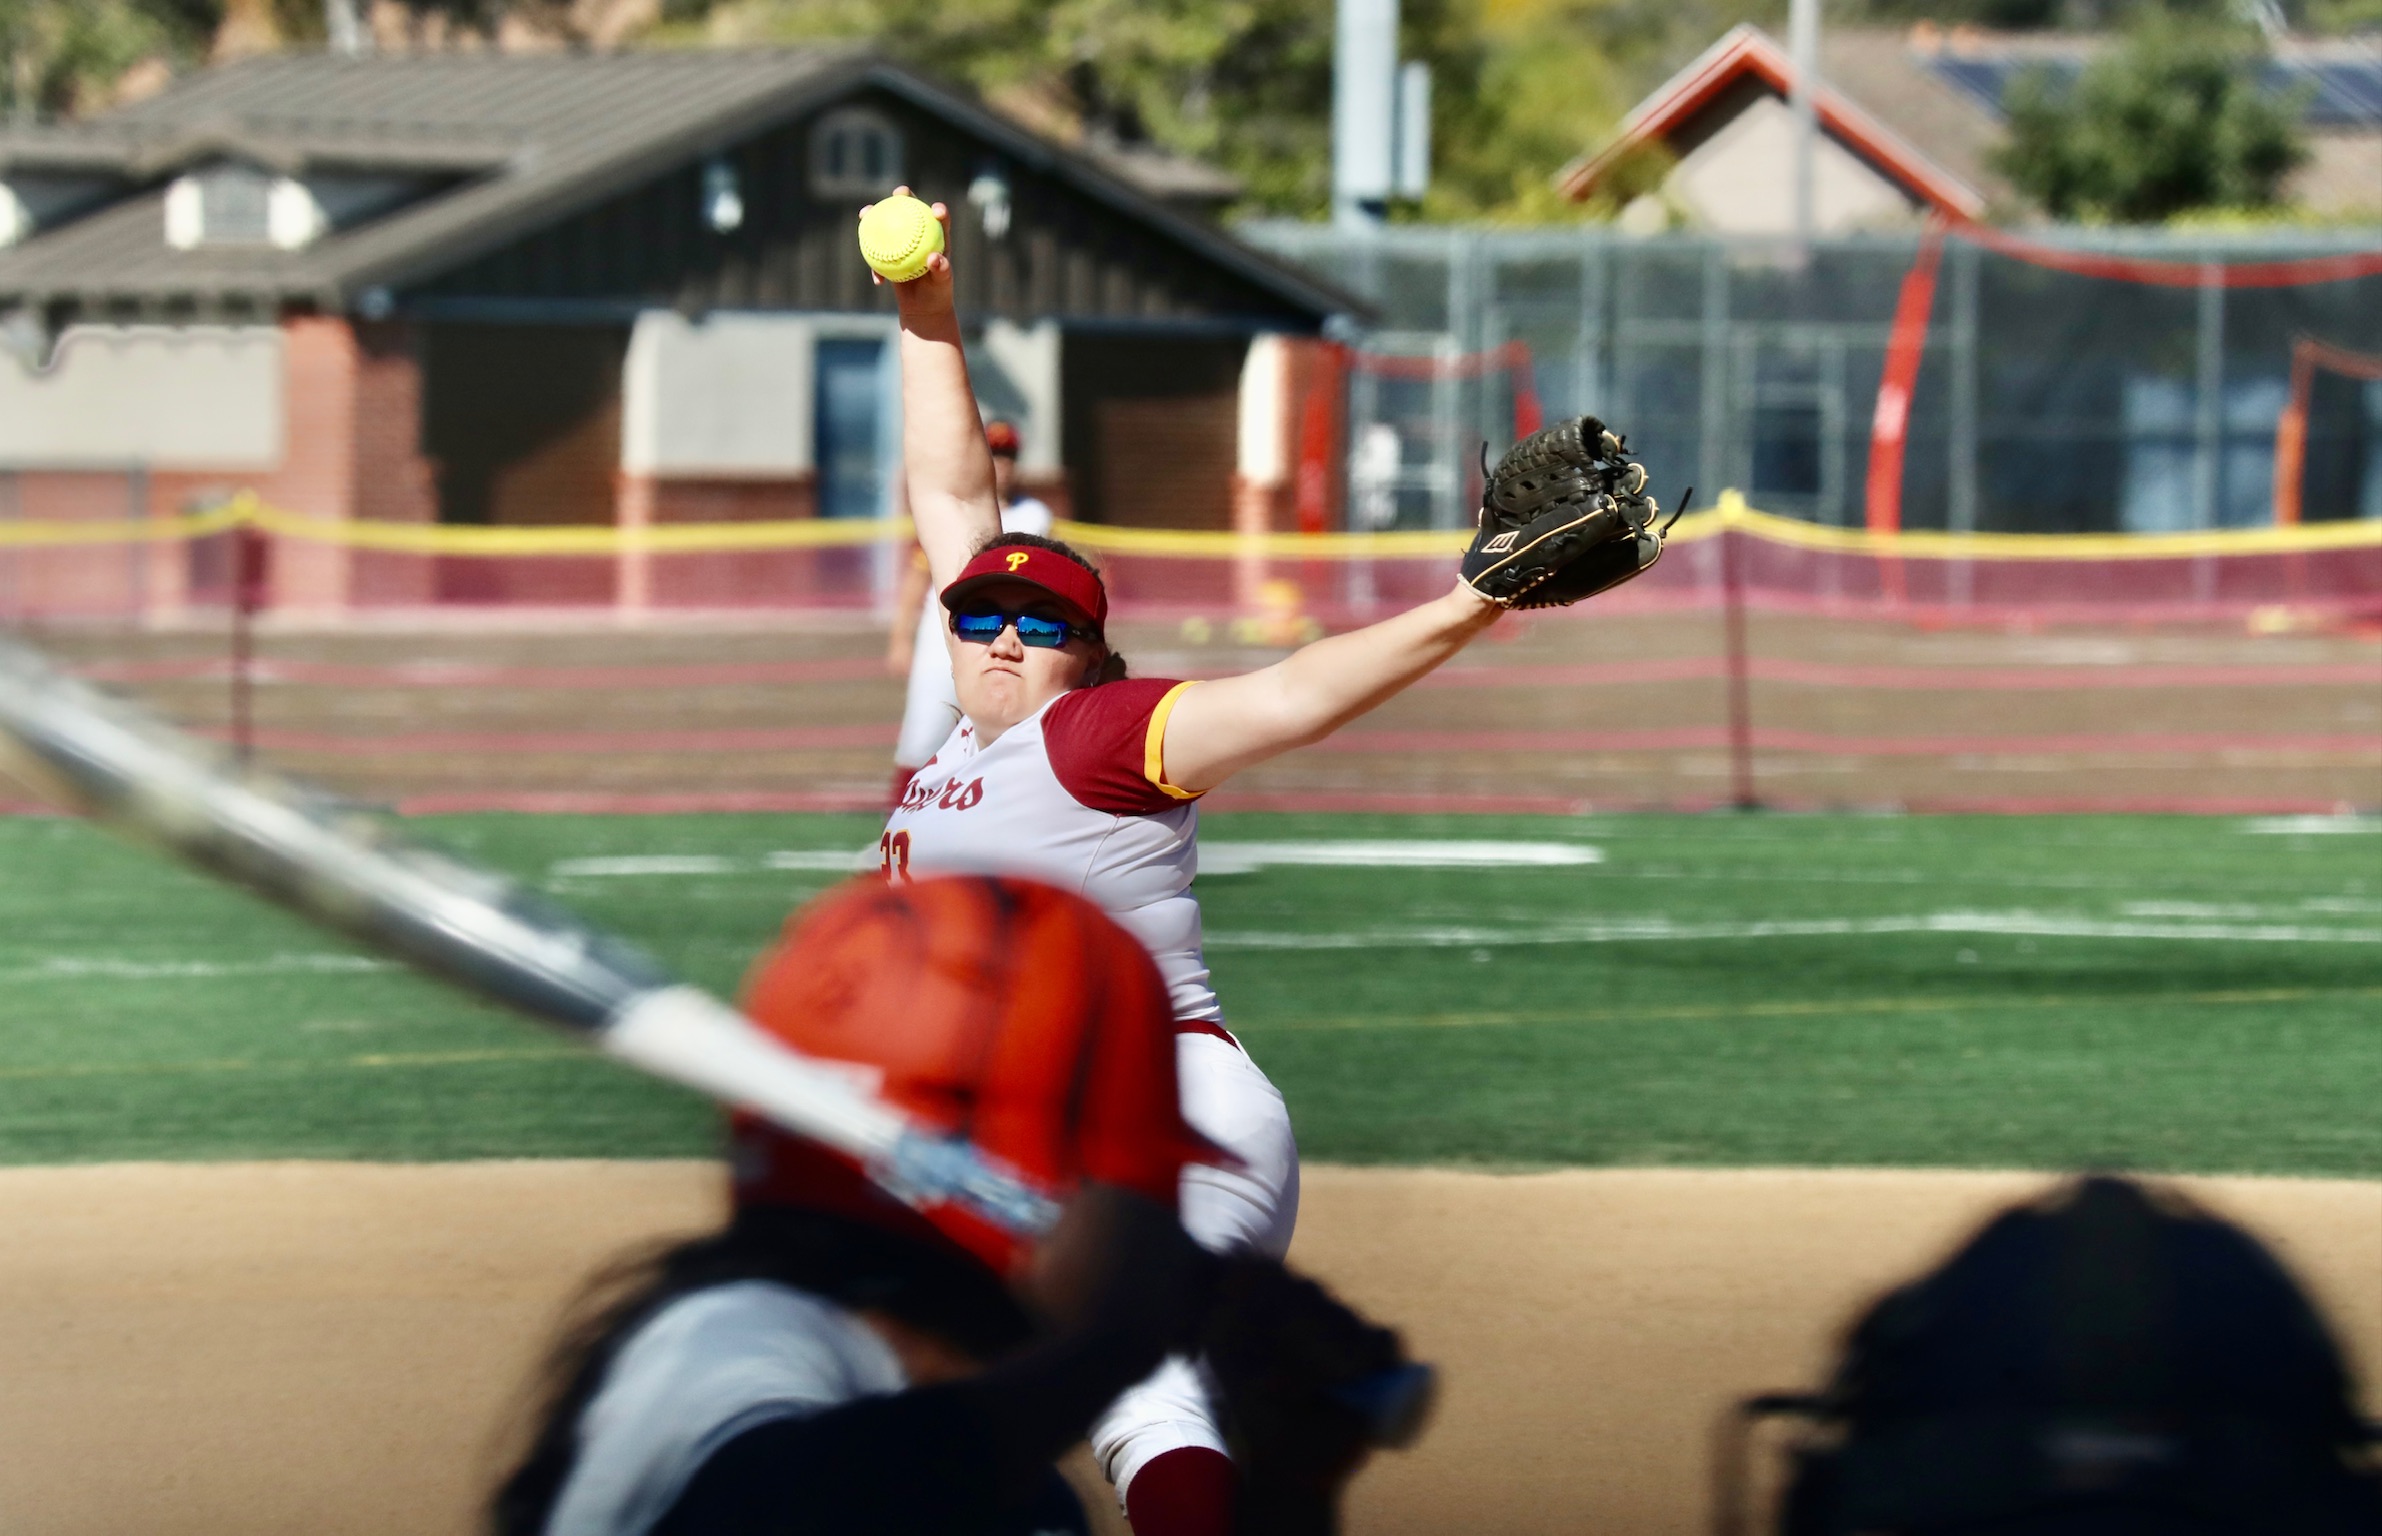 Lancers hurler Kiley Kraft fires a pitch in a recent game (photo by Michael Watkins, Athletics).